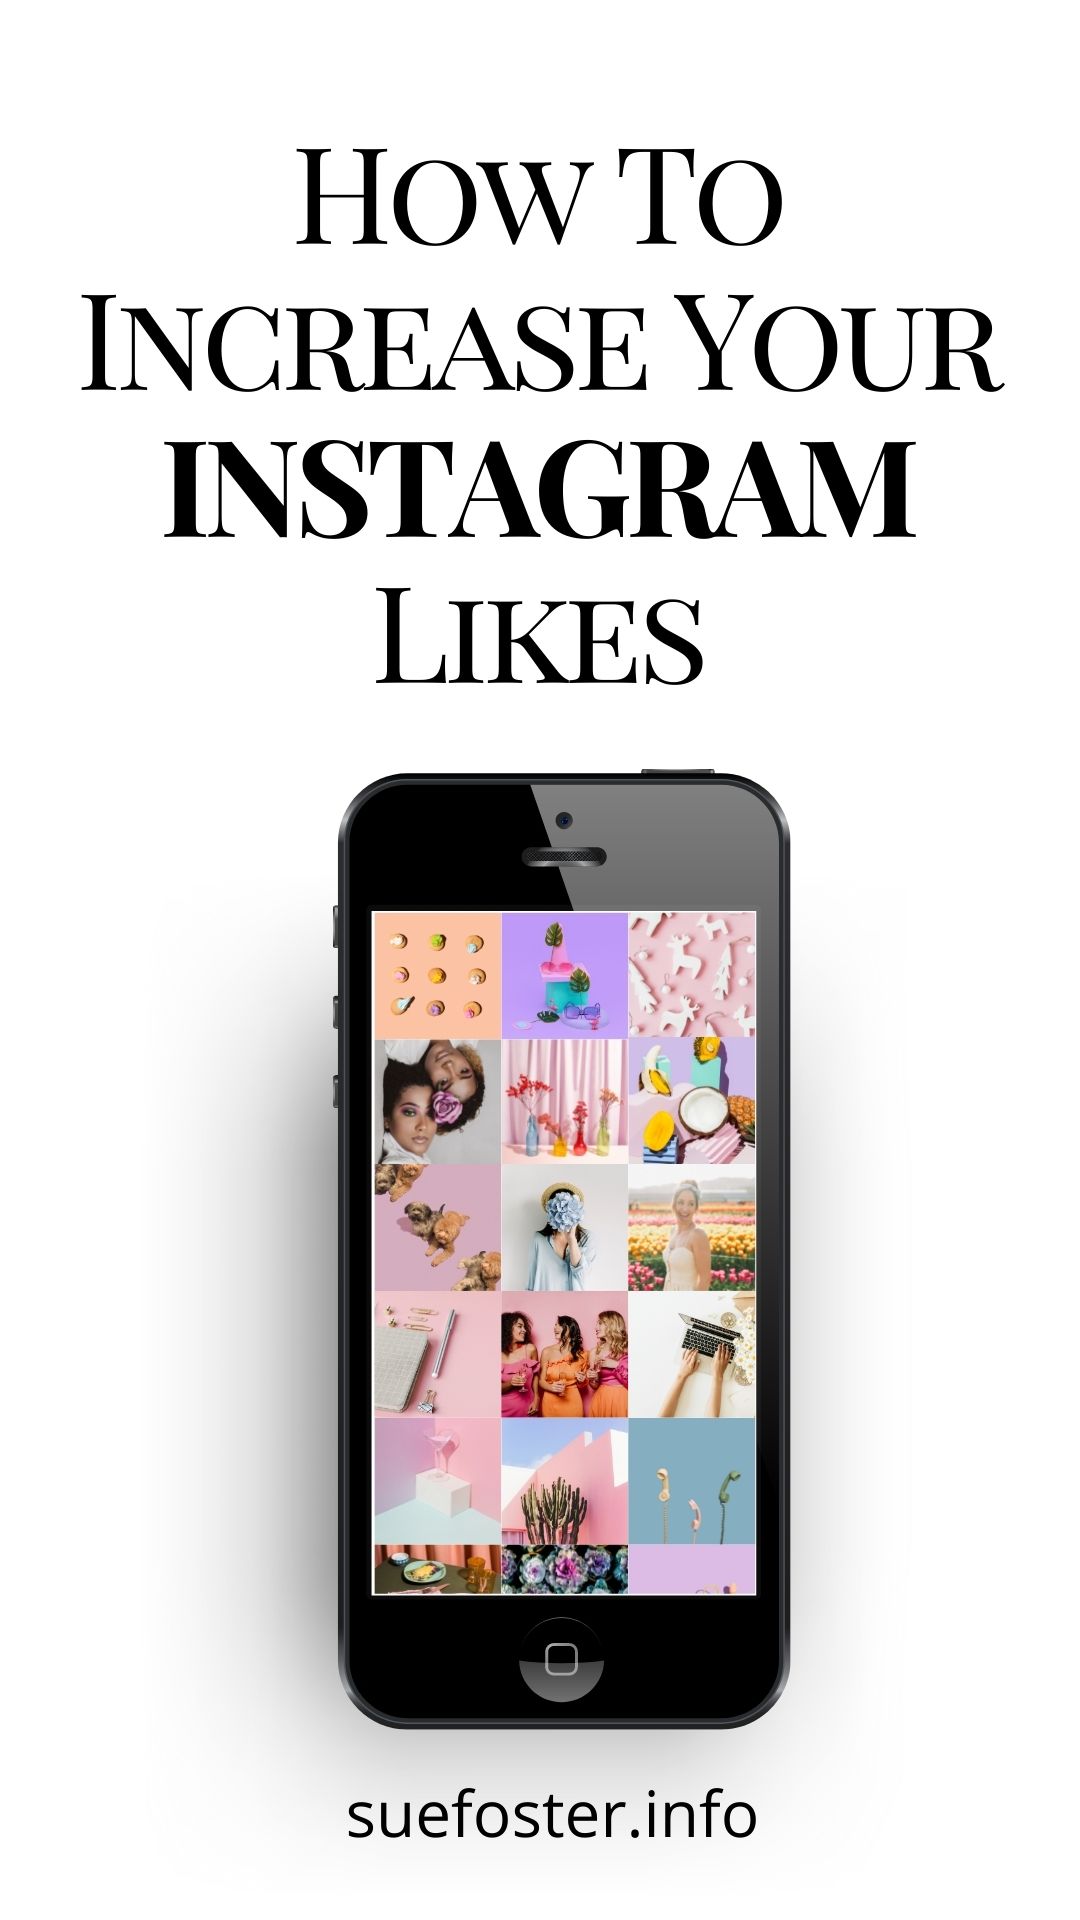 By using some or all of the strategies in this post, you can start to increase your Instagram following and get more likes on your posts.